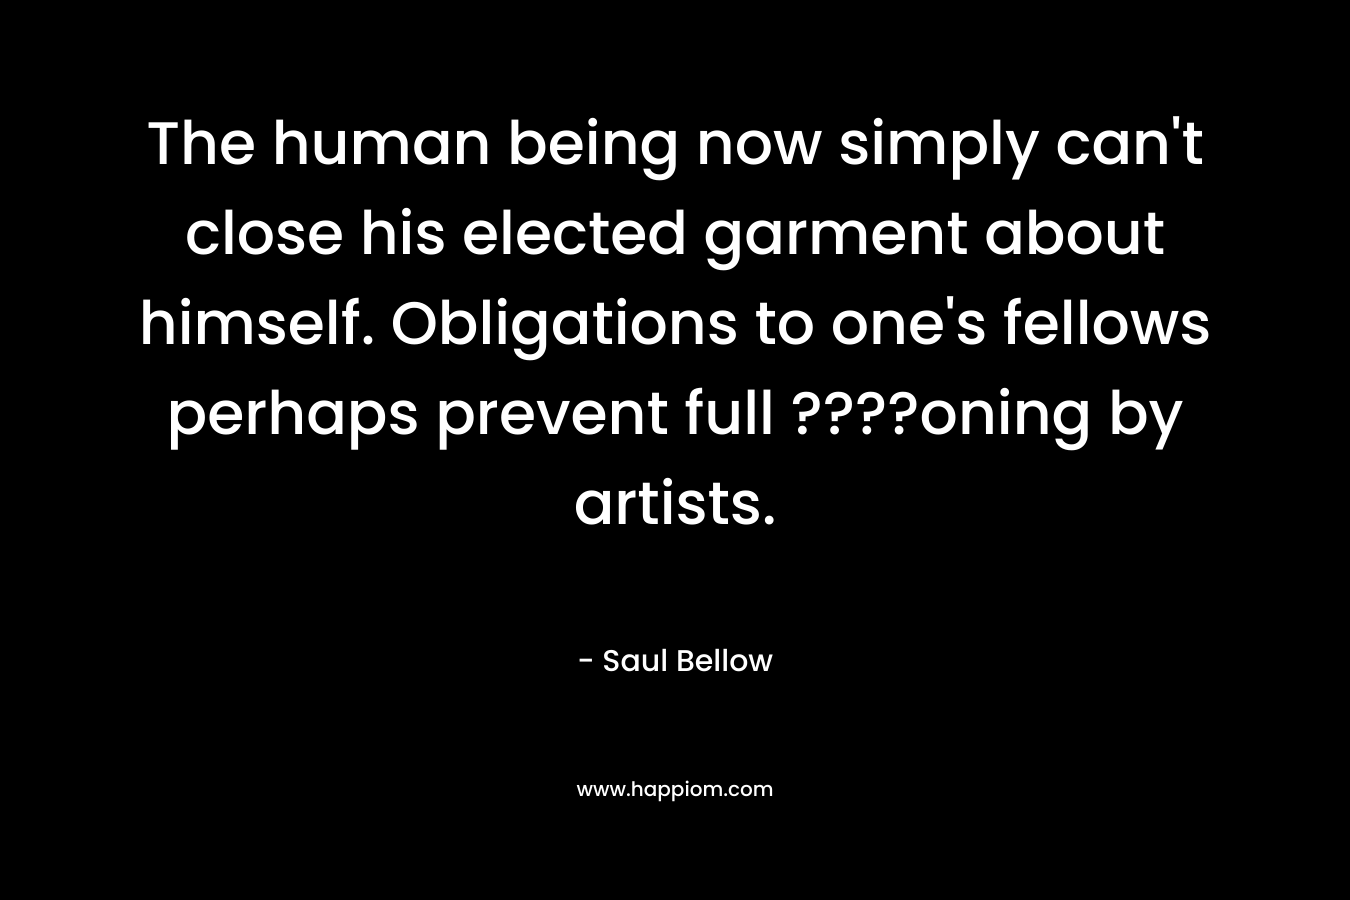 The human being now simply can’t close his elected garment about himself. Obligations to one’s fellows perhaps prevent full ????oning by artists. – Saul Bellow